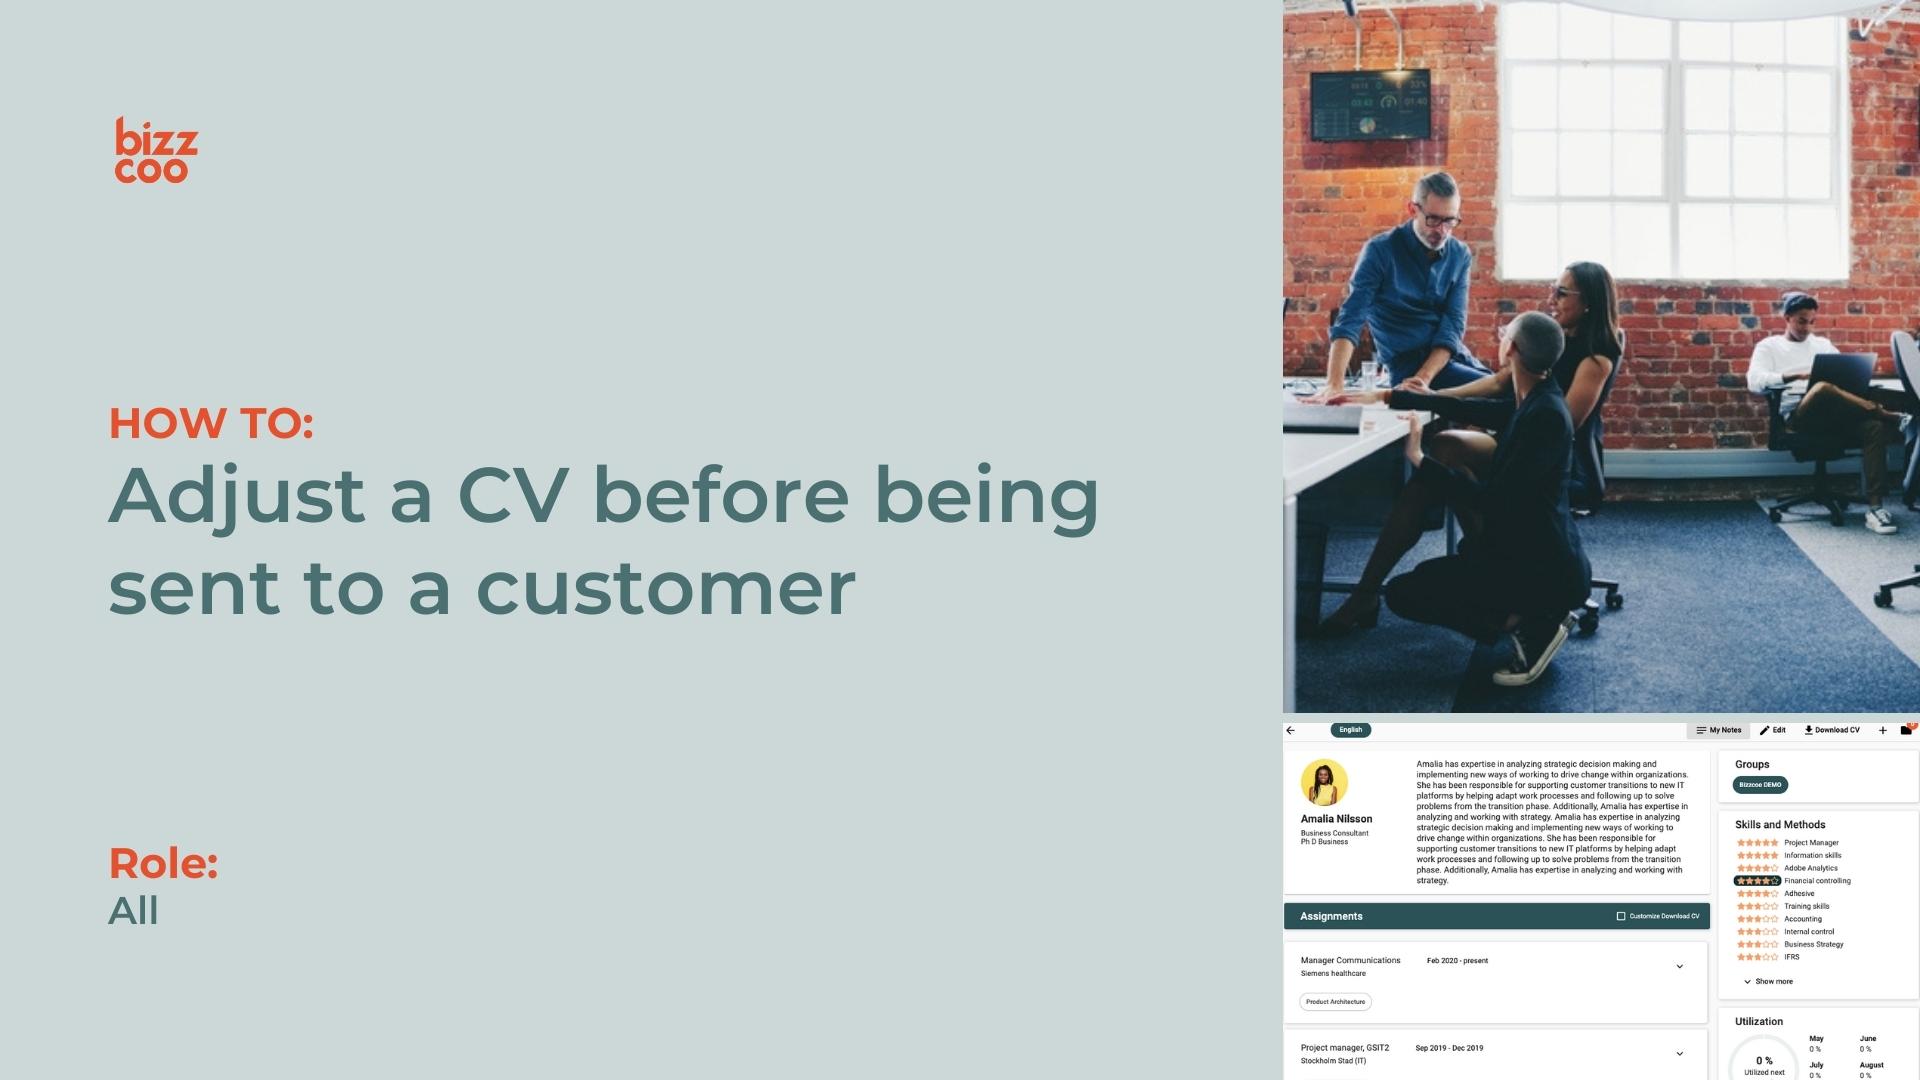 How to adjust a CV before being sent to a customer